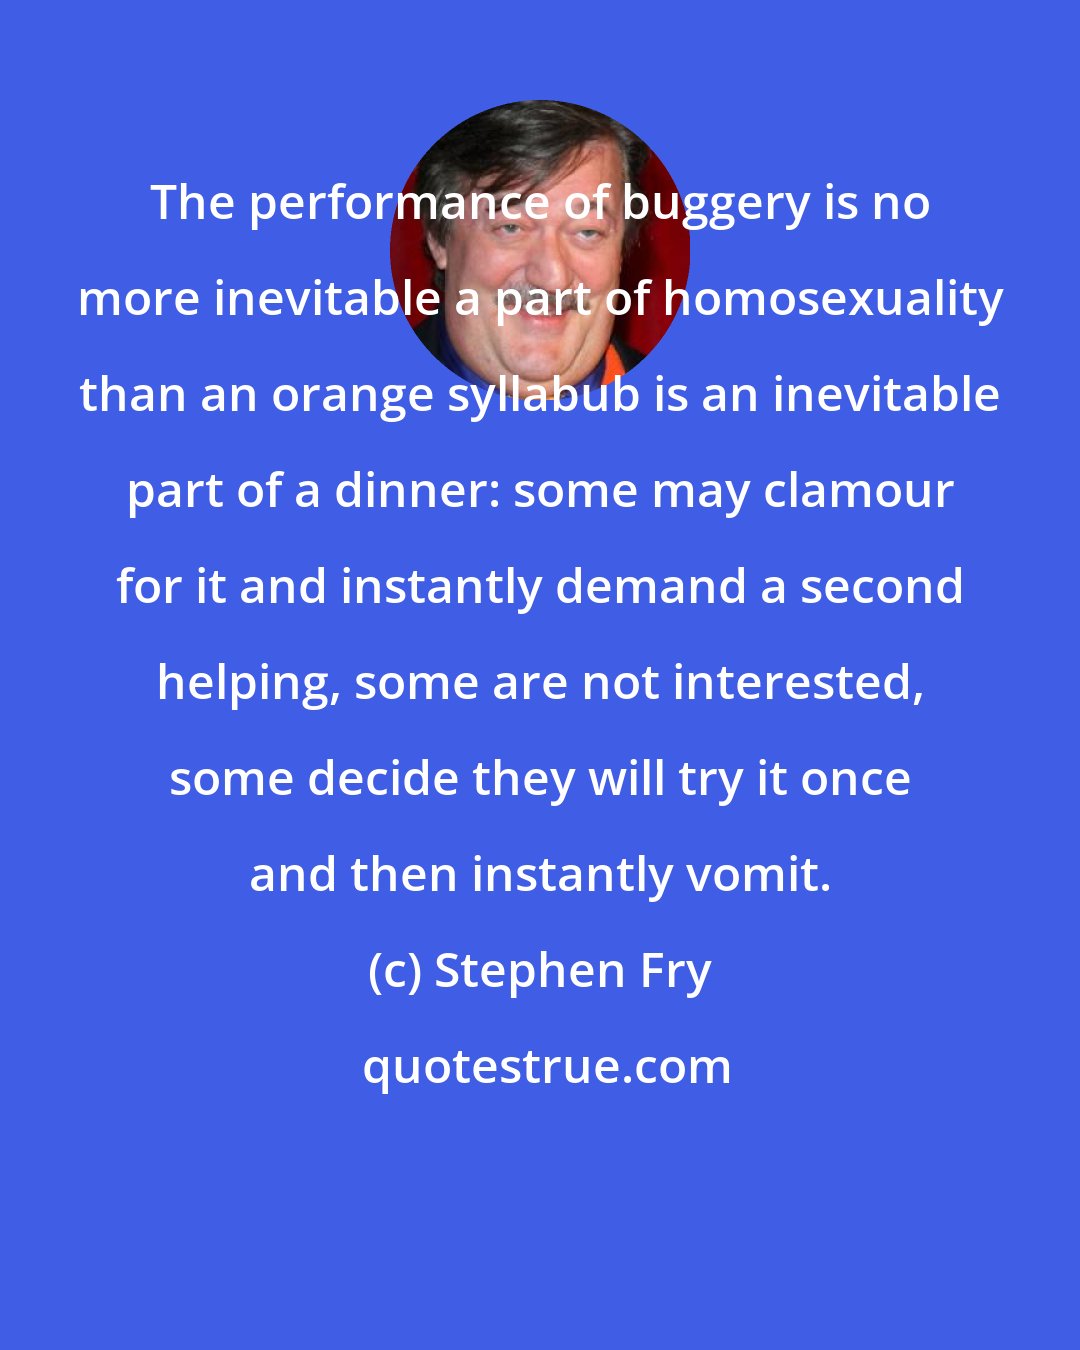 Stephen Fry: The performance of buggery is no more inevitable a part of homosexuality than an orange syllabub is an inevitable part of a dinner: some may clamour for it and instantly demand a second helping, some are not interested, some decide they will try it once and then instantly vomit.